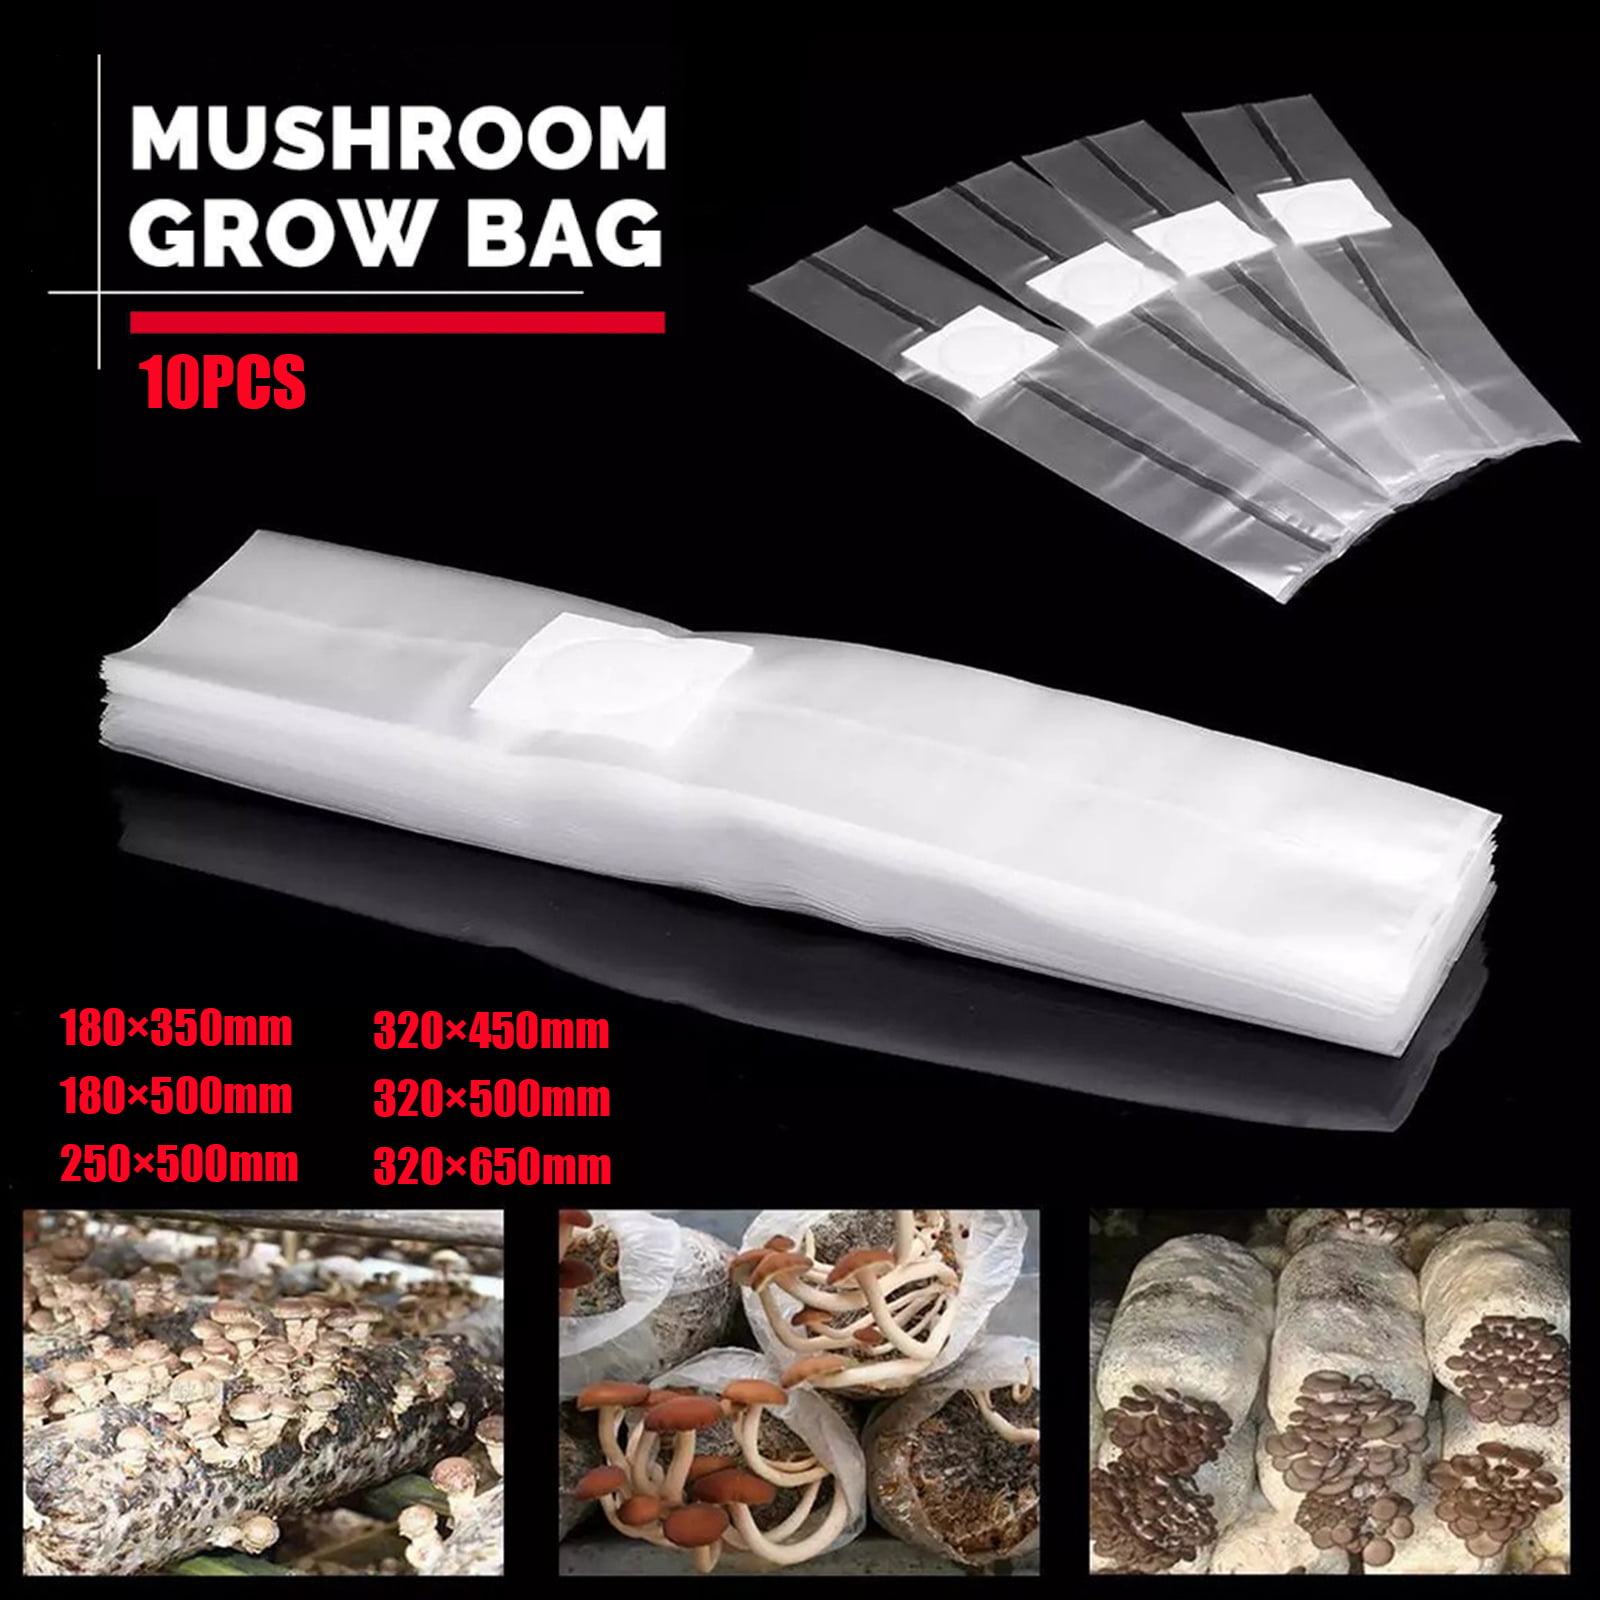 gain I wear clothes Alexander Graham Bell BOOBEAUTY 10Pcs Mushroom Growing Bags Mushroom Spawn Bags Sealable Spawn Myco  Bags Gardening Plant Growing Bags Garden Planting Containers - Walmart.com